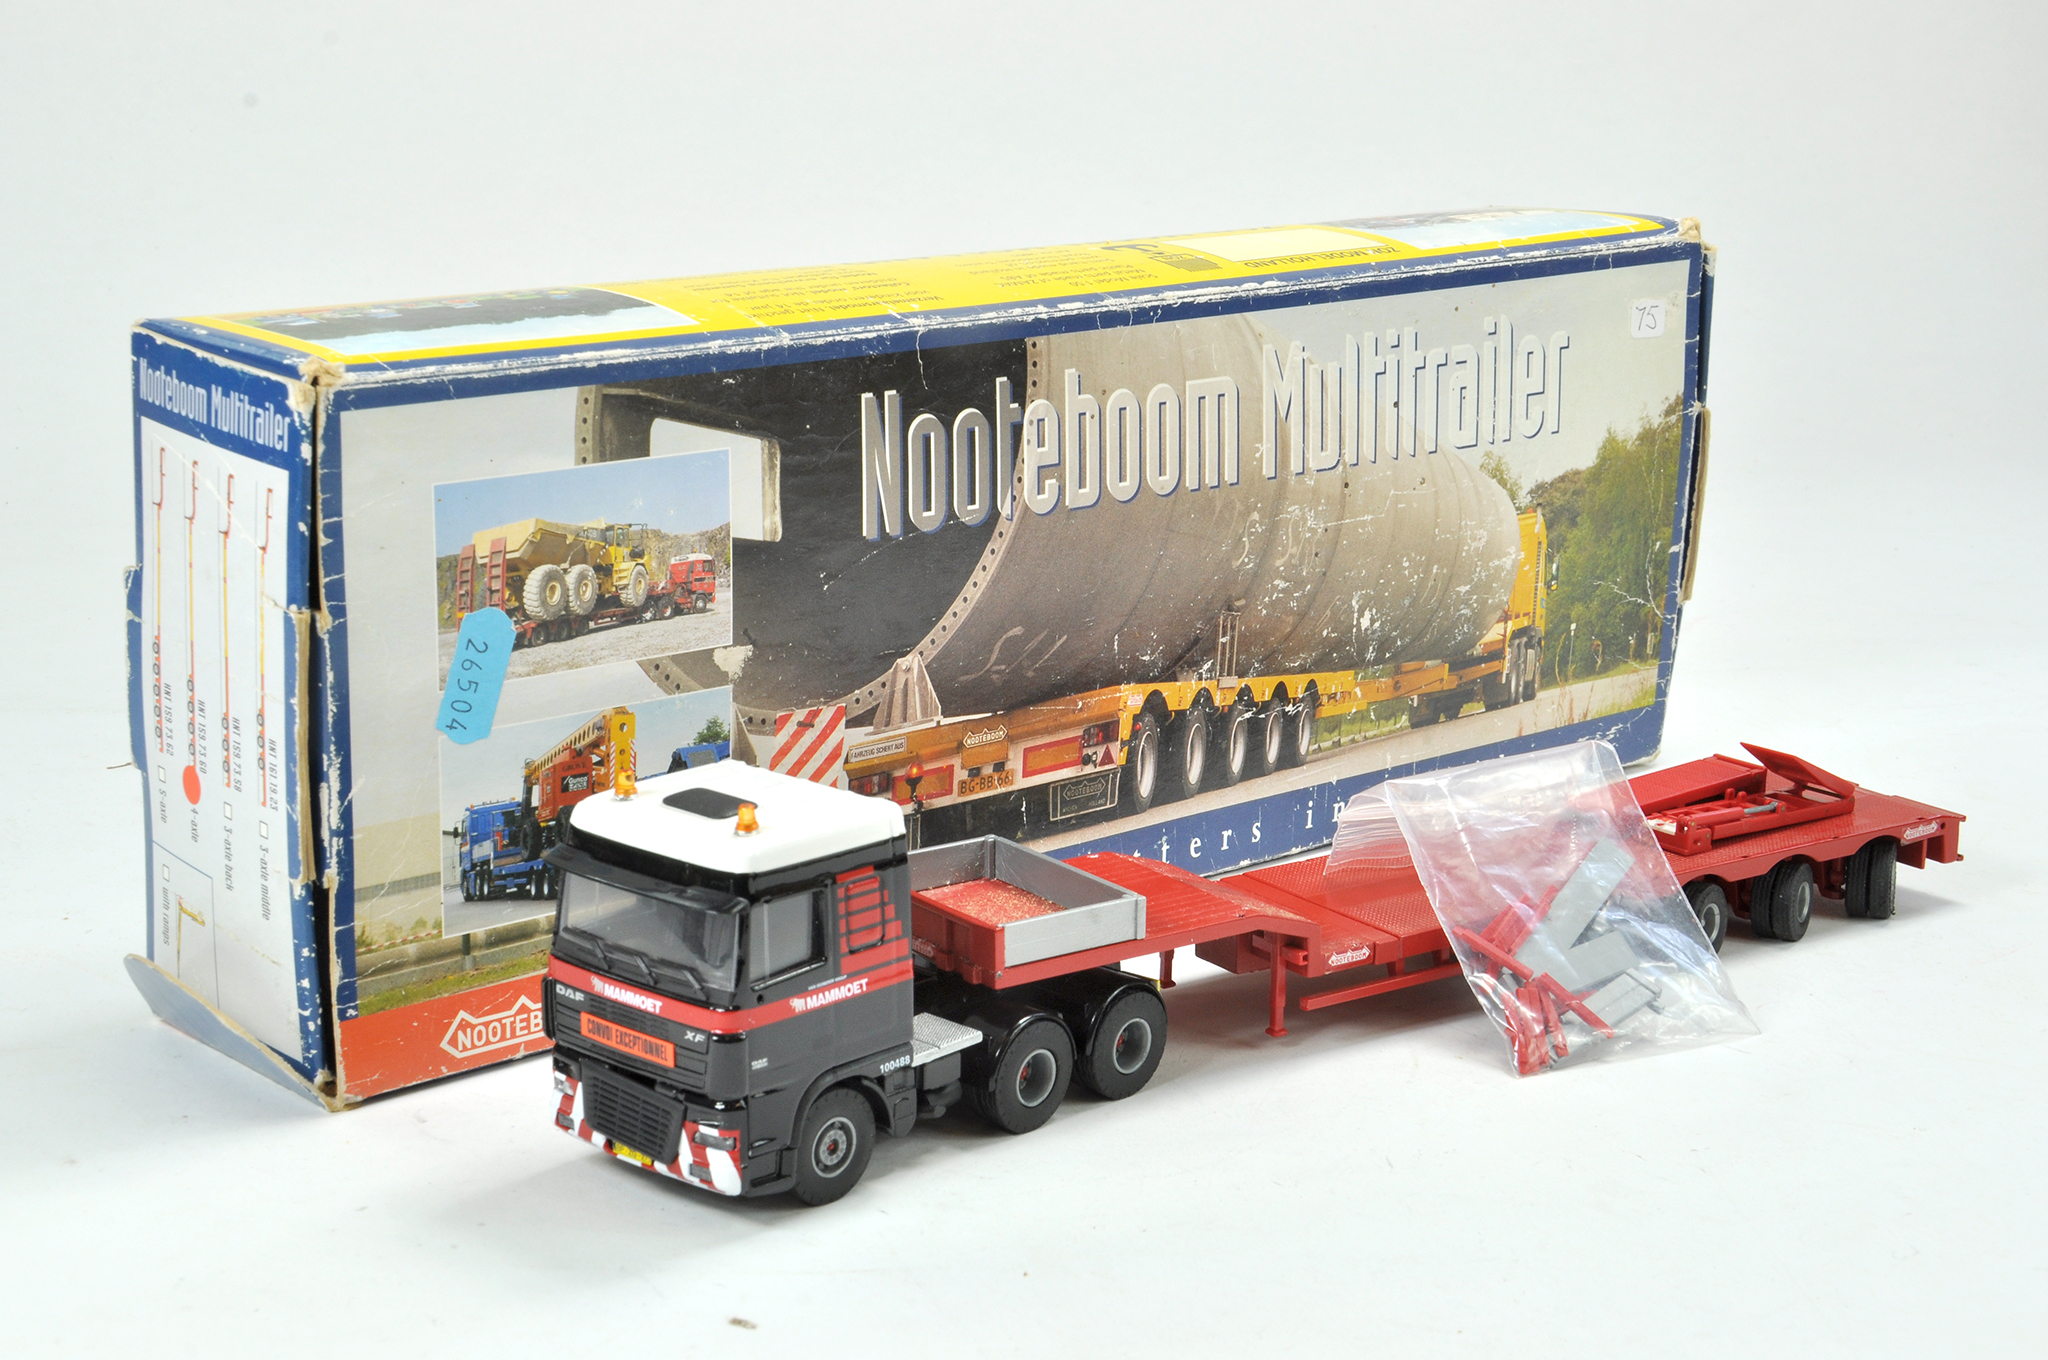 Zon / Lion Car 1/50 diecast truck issue comprising Nooteboom Mammoet Low Loader Combination Set.